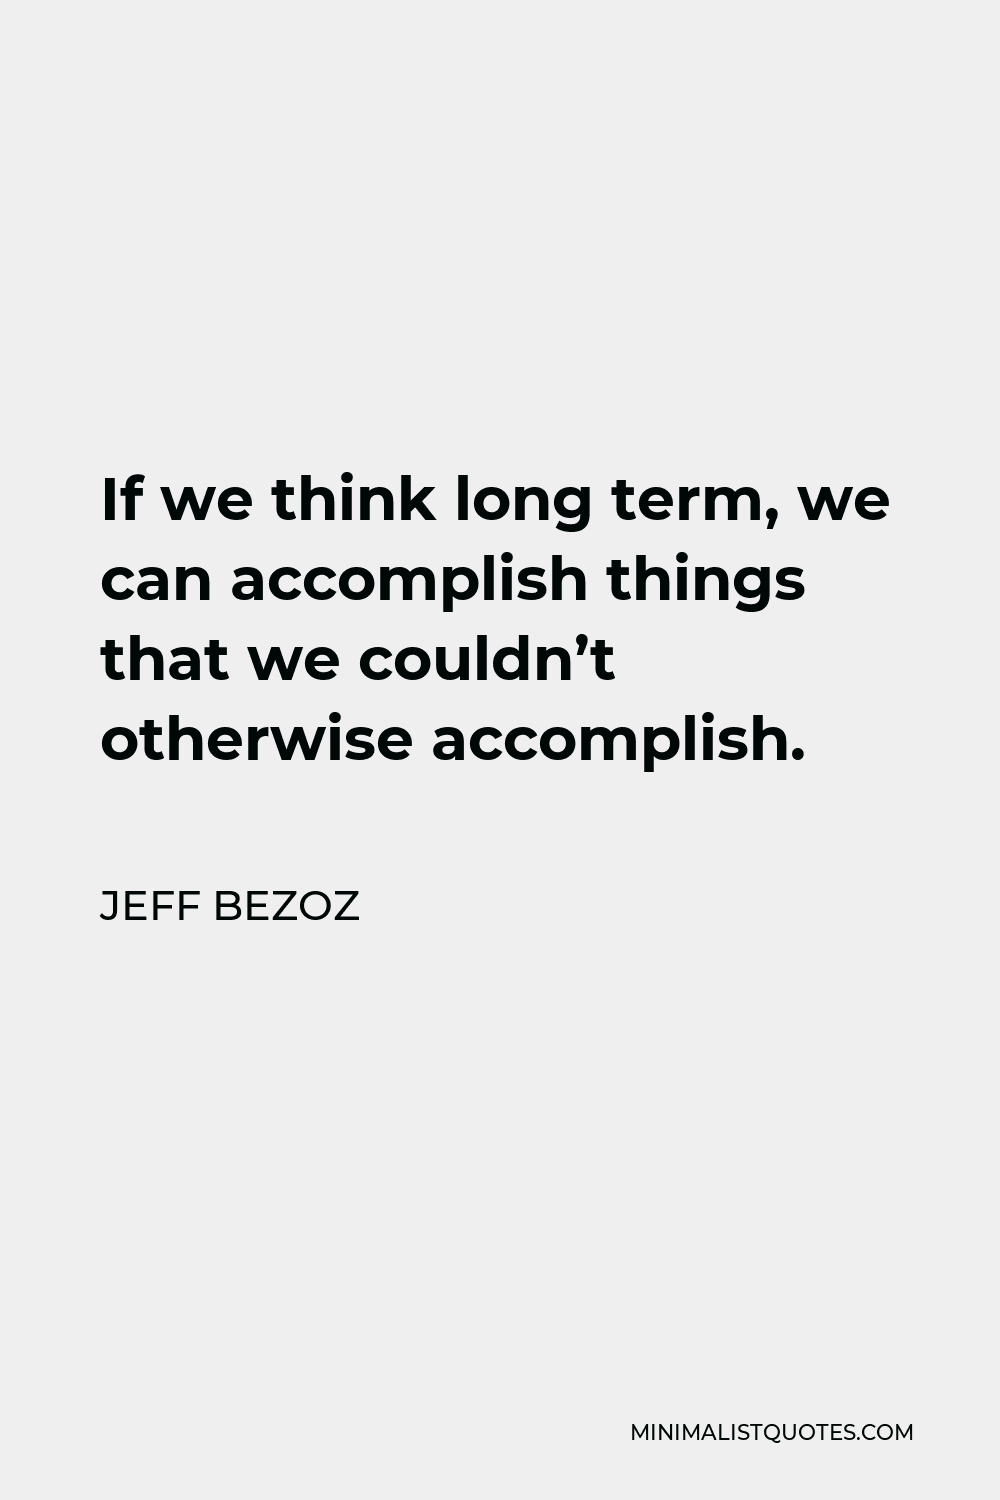 Jeff Bezoz Quote - If we think long term, we can accomplish things that we couldn’t otherwise accomplish.